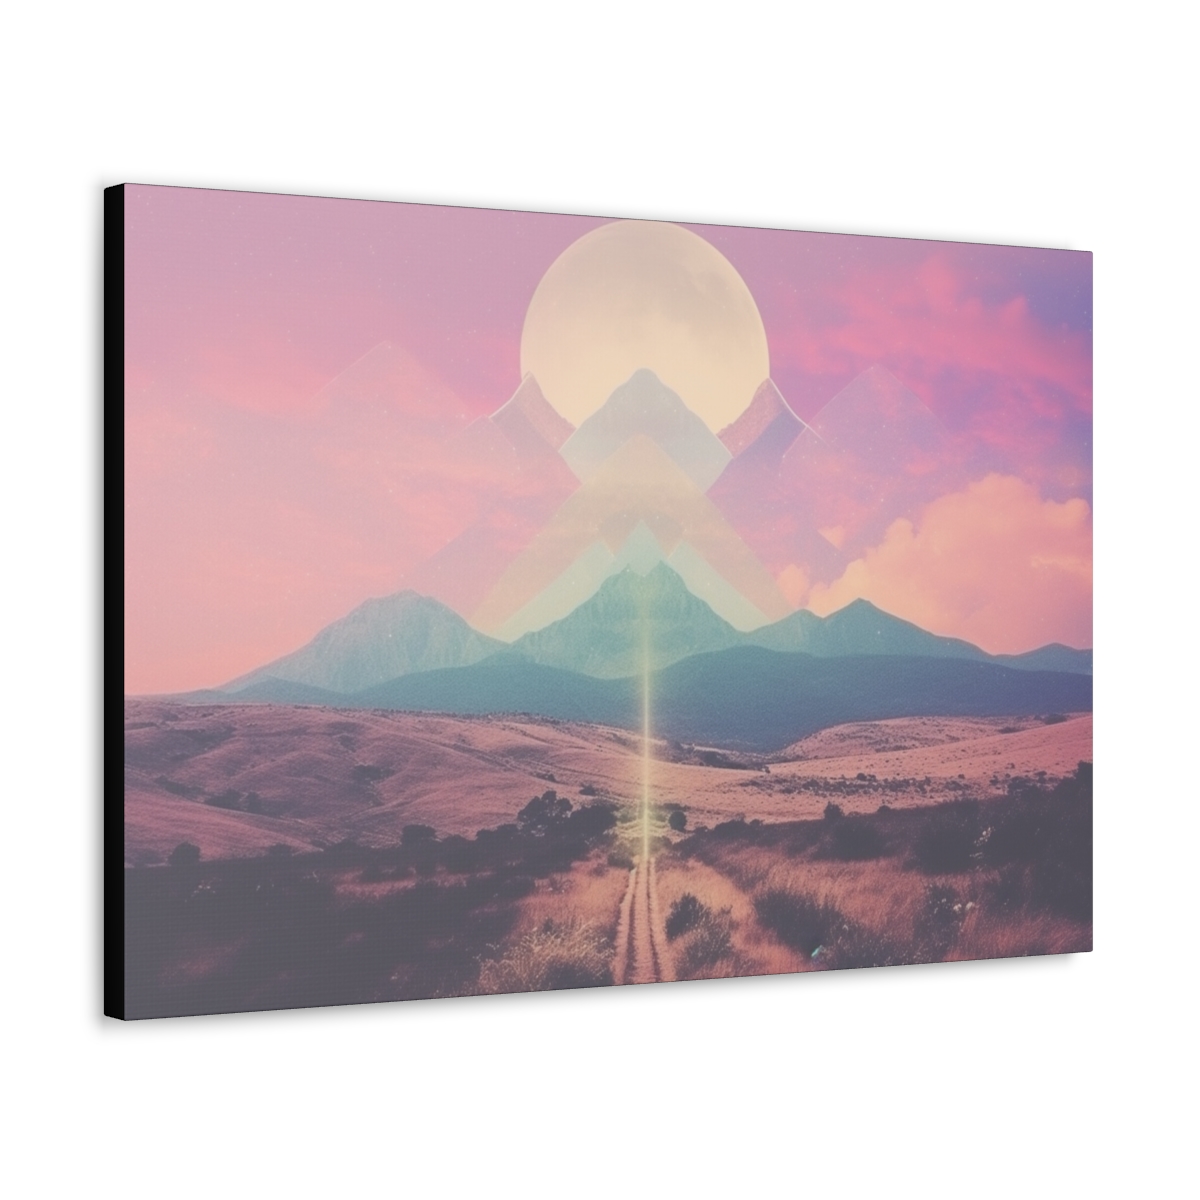 Ethereal Nature Art Canvas Print: A Scenery From Your Dream